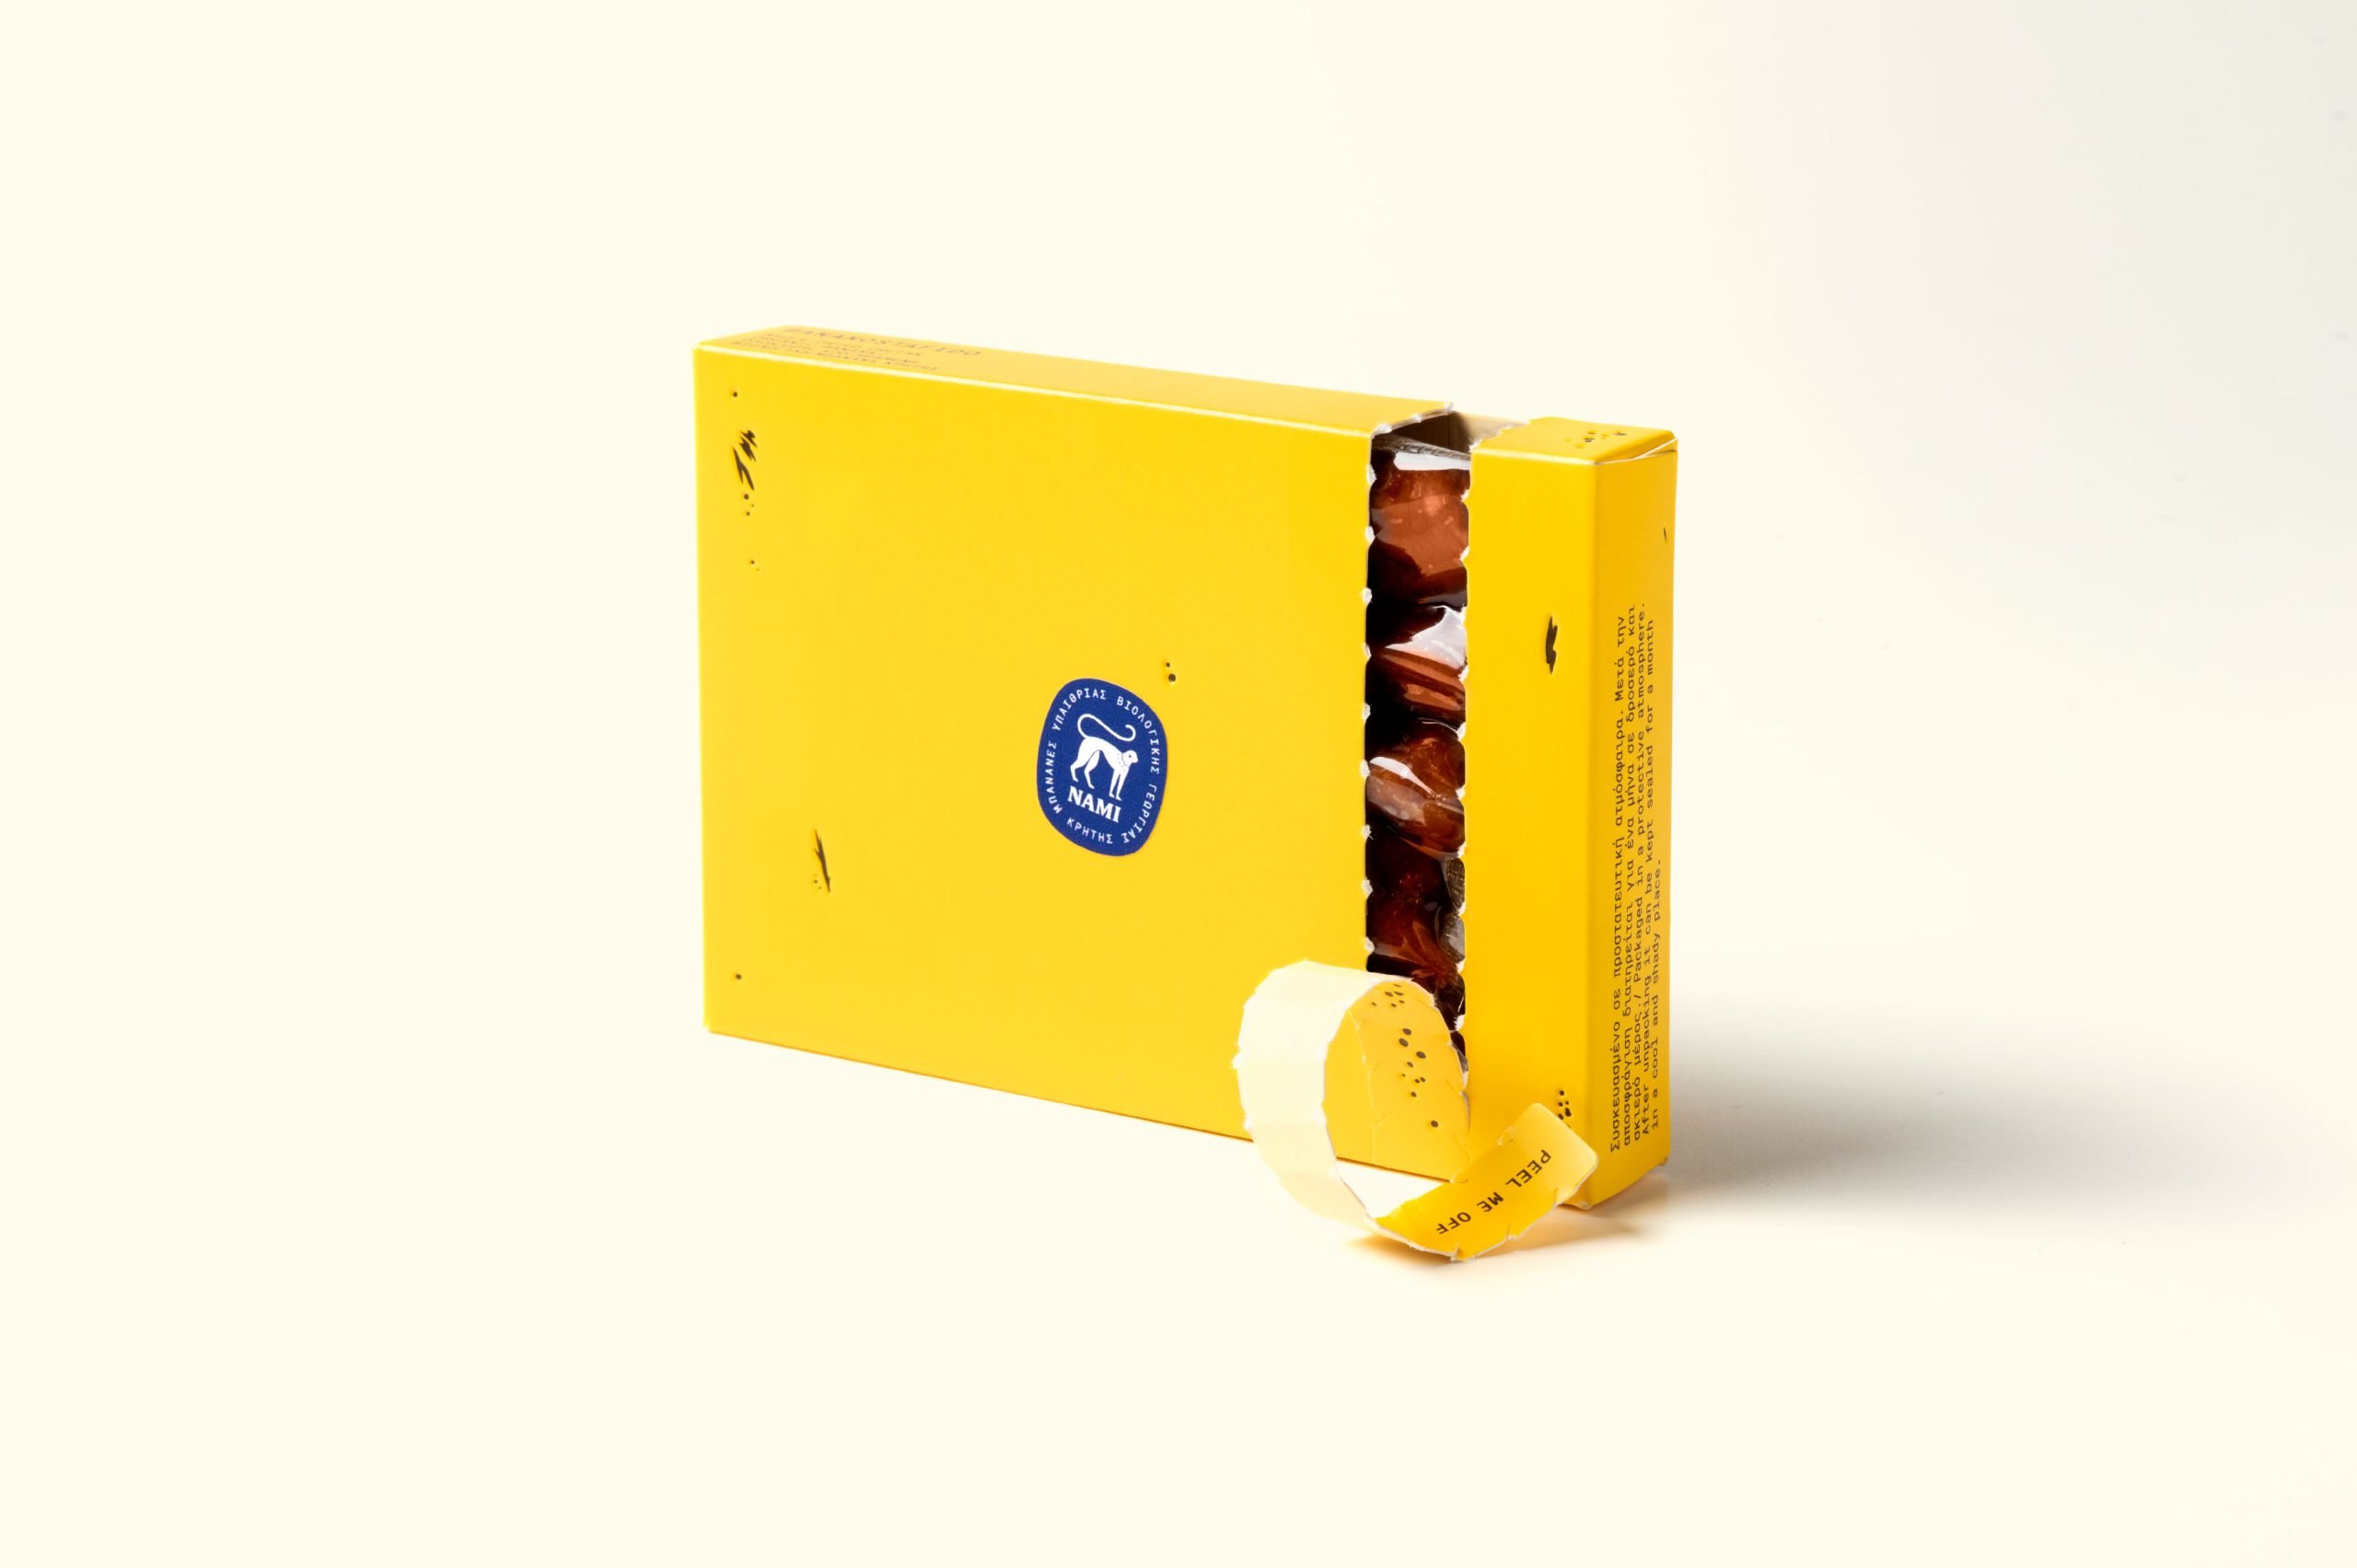 NAMI’s Snacks Have the Best Banana-Inspired Packaging We’ve Seen Since Andy Warhol